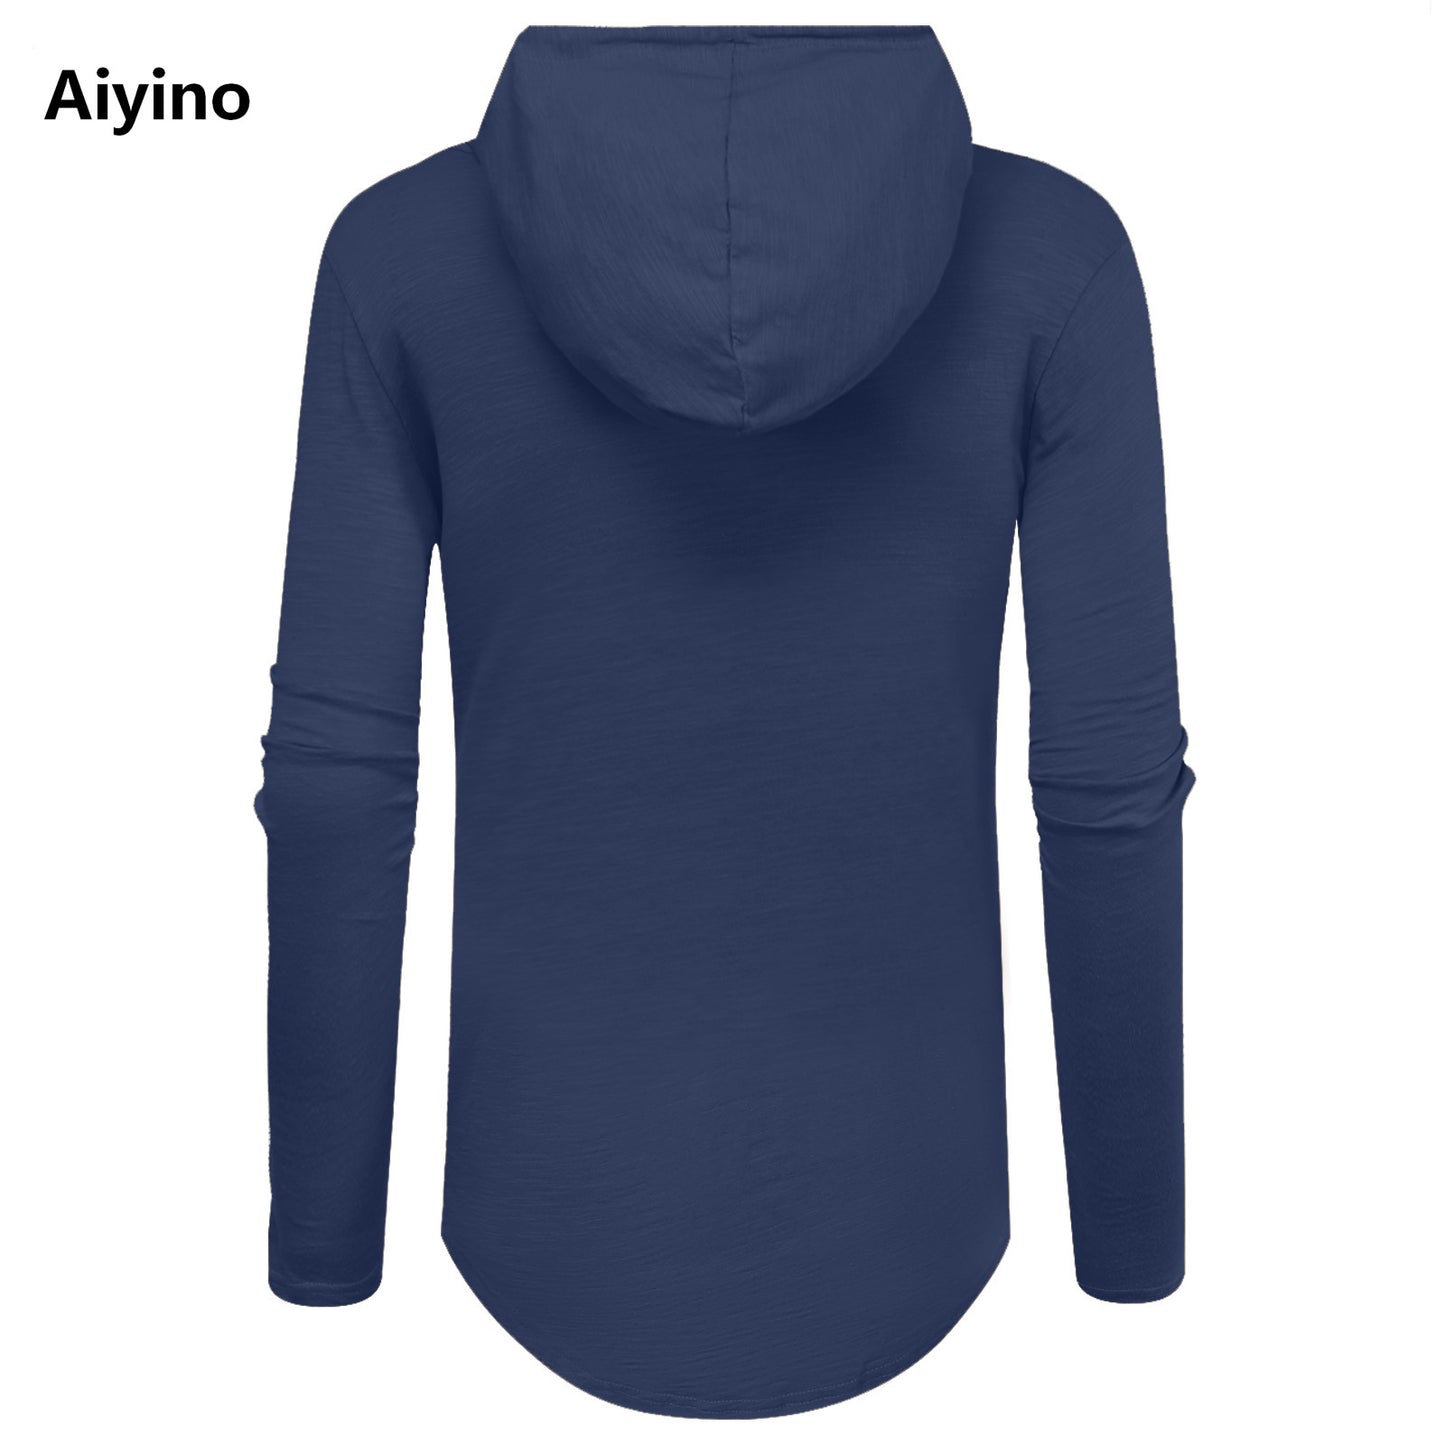 Aiyino Men's Long Sleeve Athletic Hoodies Sport Sweatshirt Solid Color Fashion Pullover